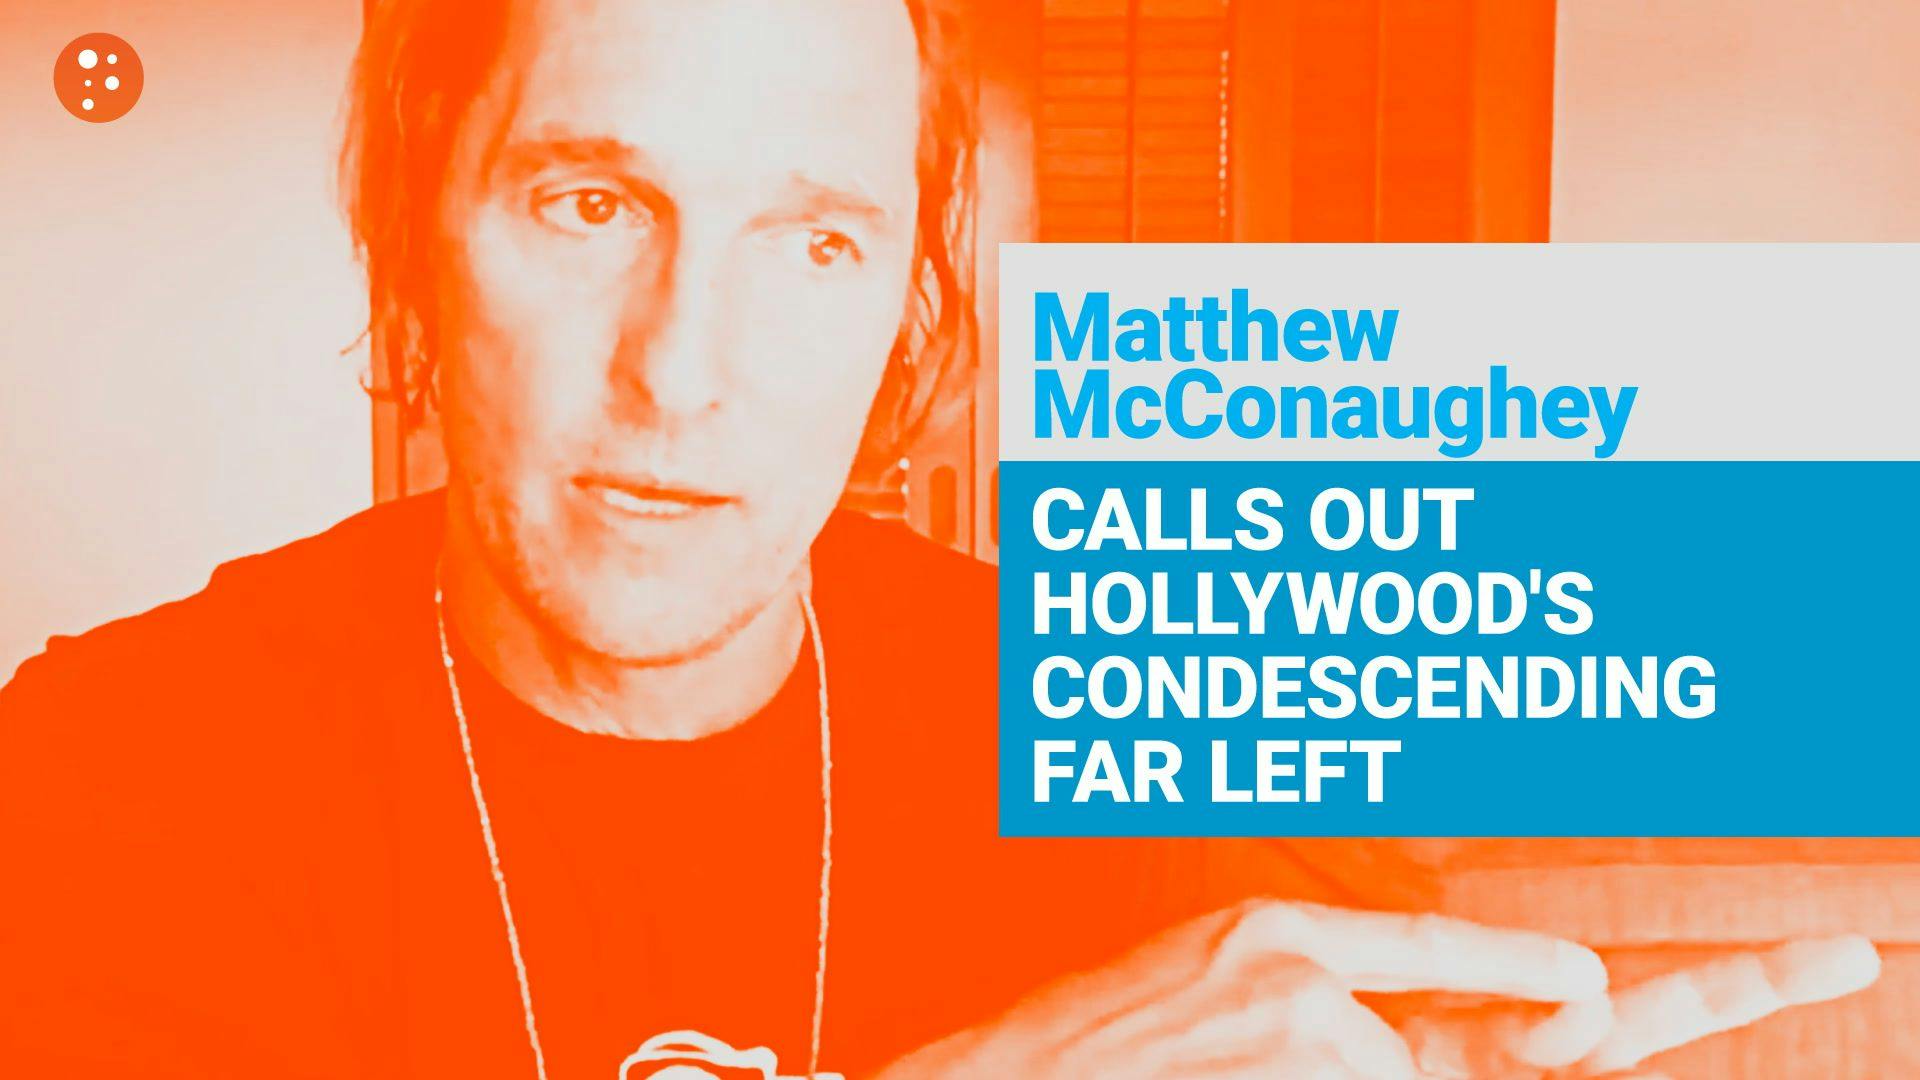 Matthew McConaughey Calls Out Hollywood's Condescending Far-Left